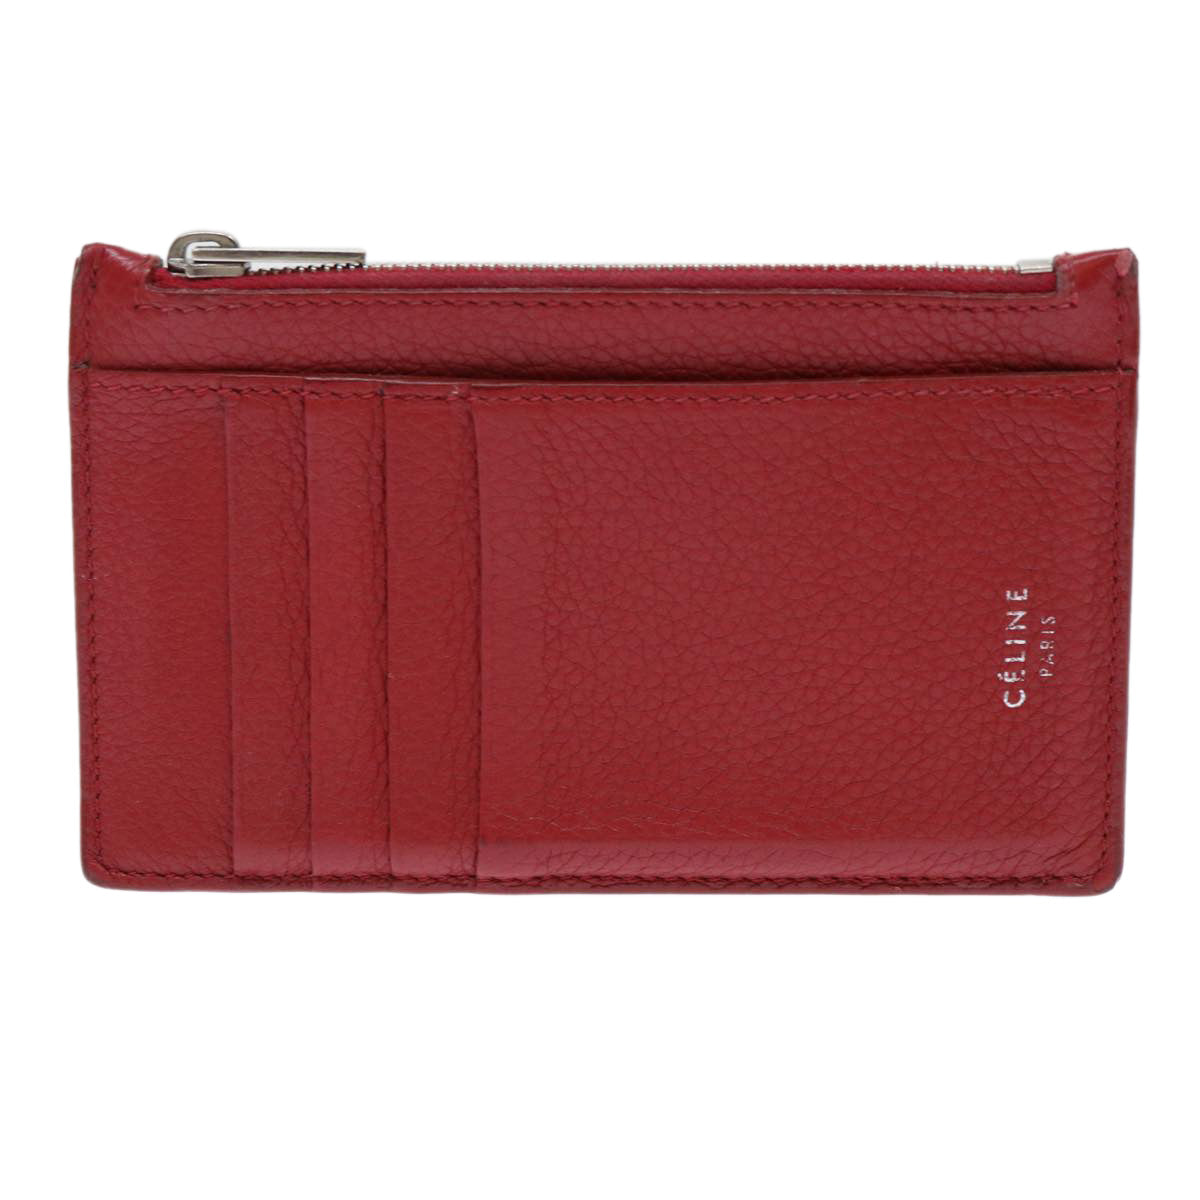 CELINE Coin Purse Leather Red Auth 50848